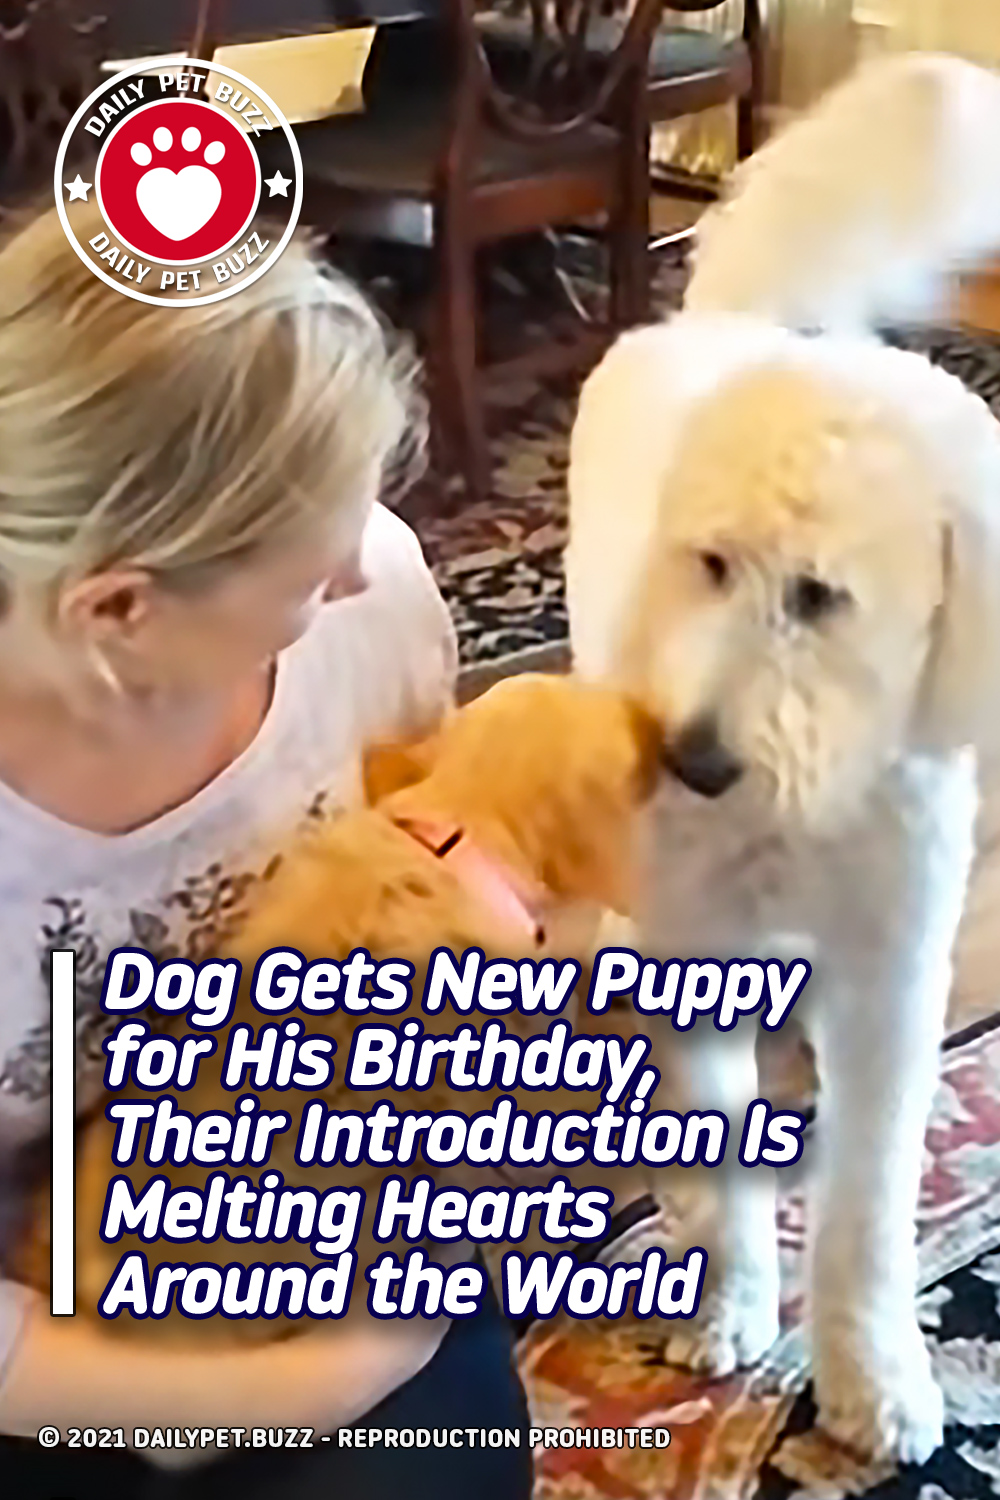 Dog Gets New Puppy for His Birthday, Their Introduction Is Melting Hearts Around the World